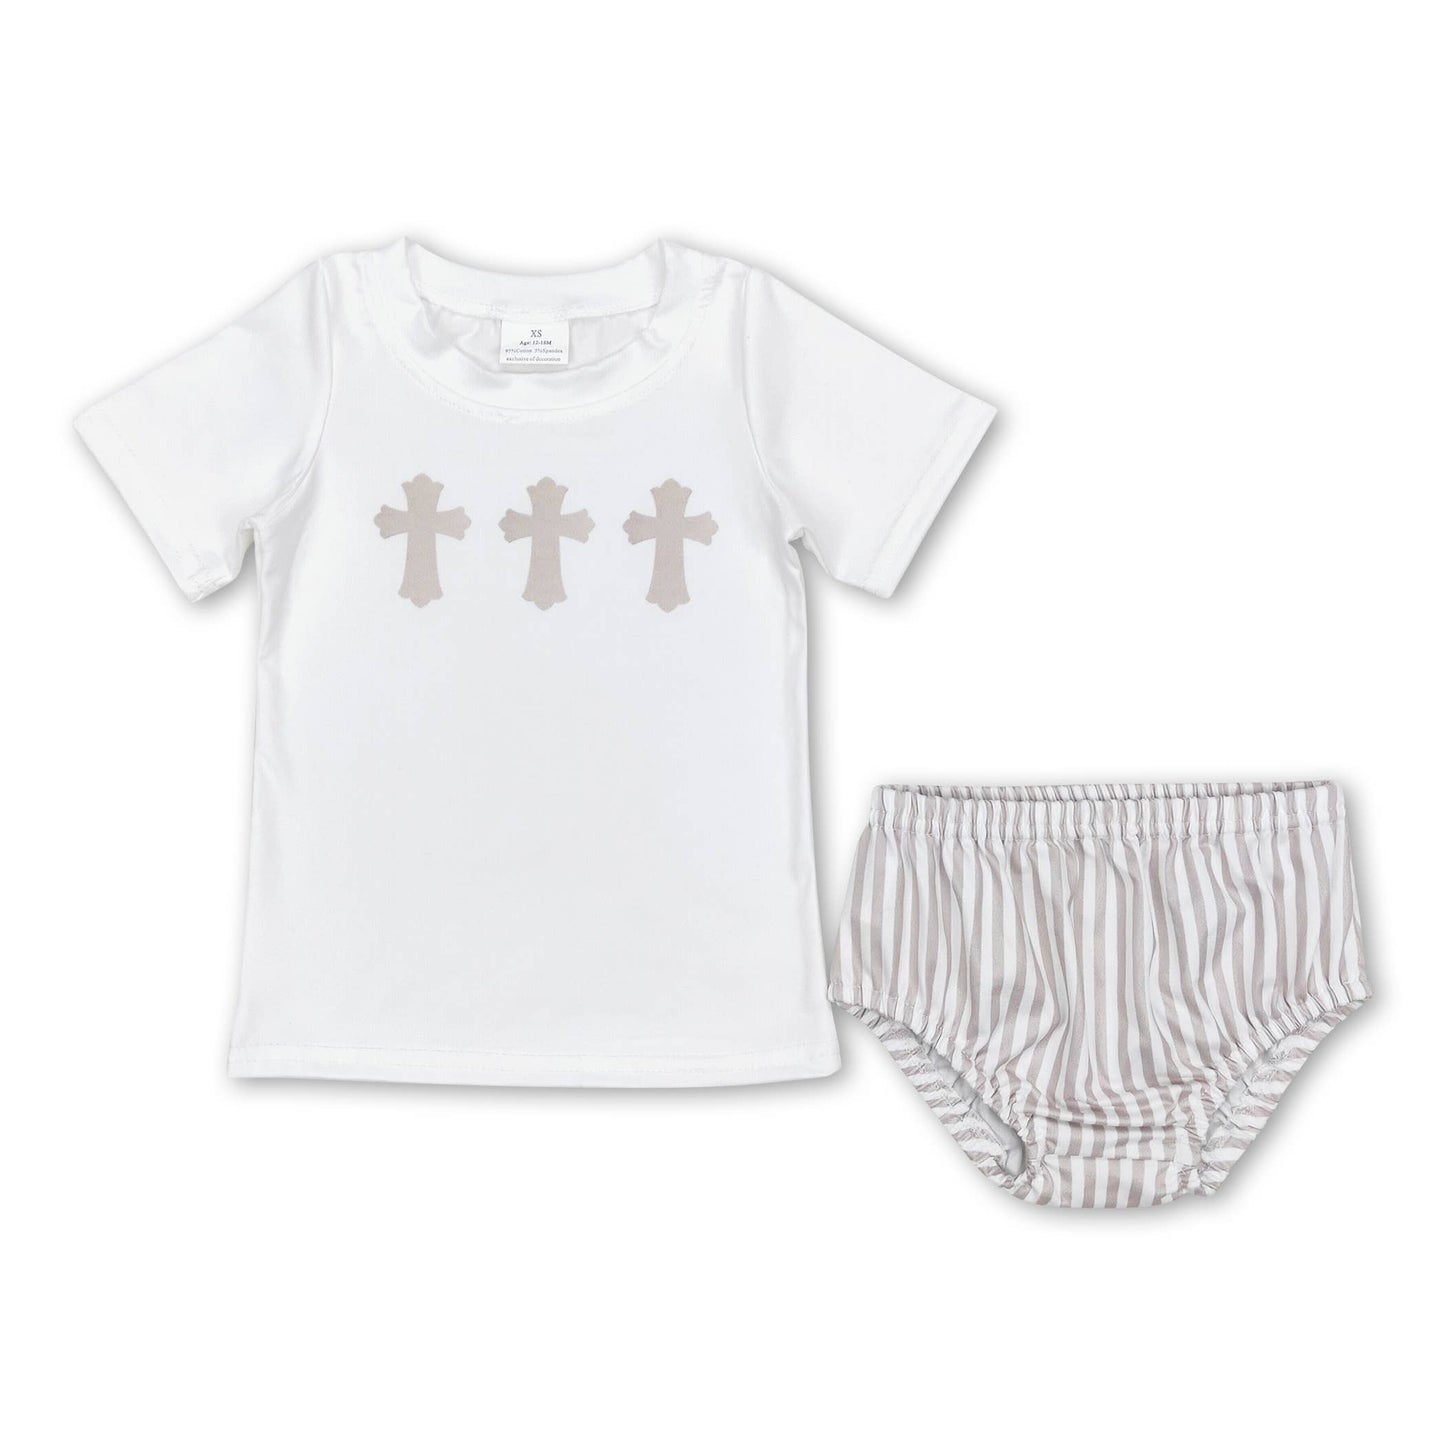 Stripe Cross Shirt & Diaper Cover | Boy Outfits     - Chickie Collective